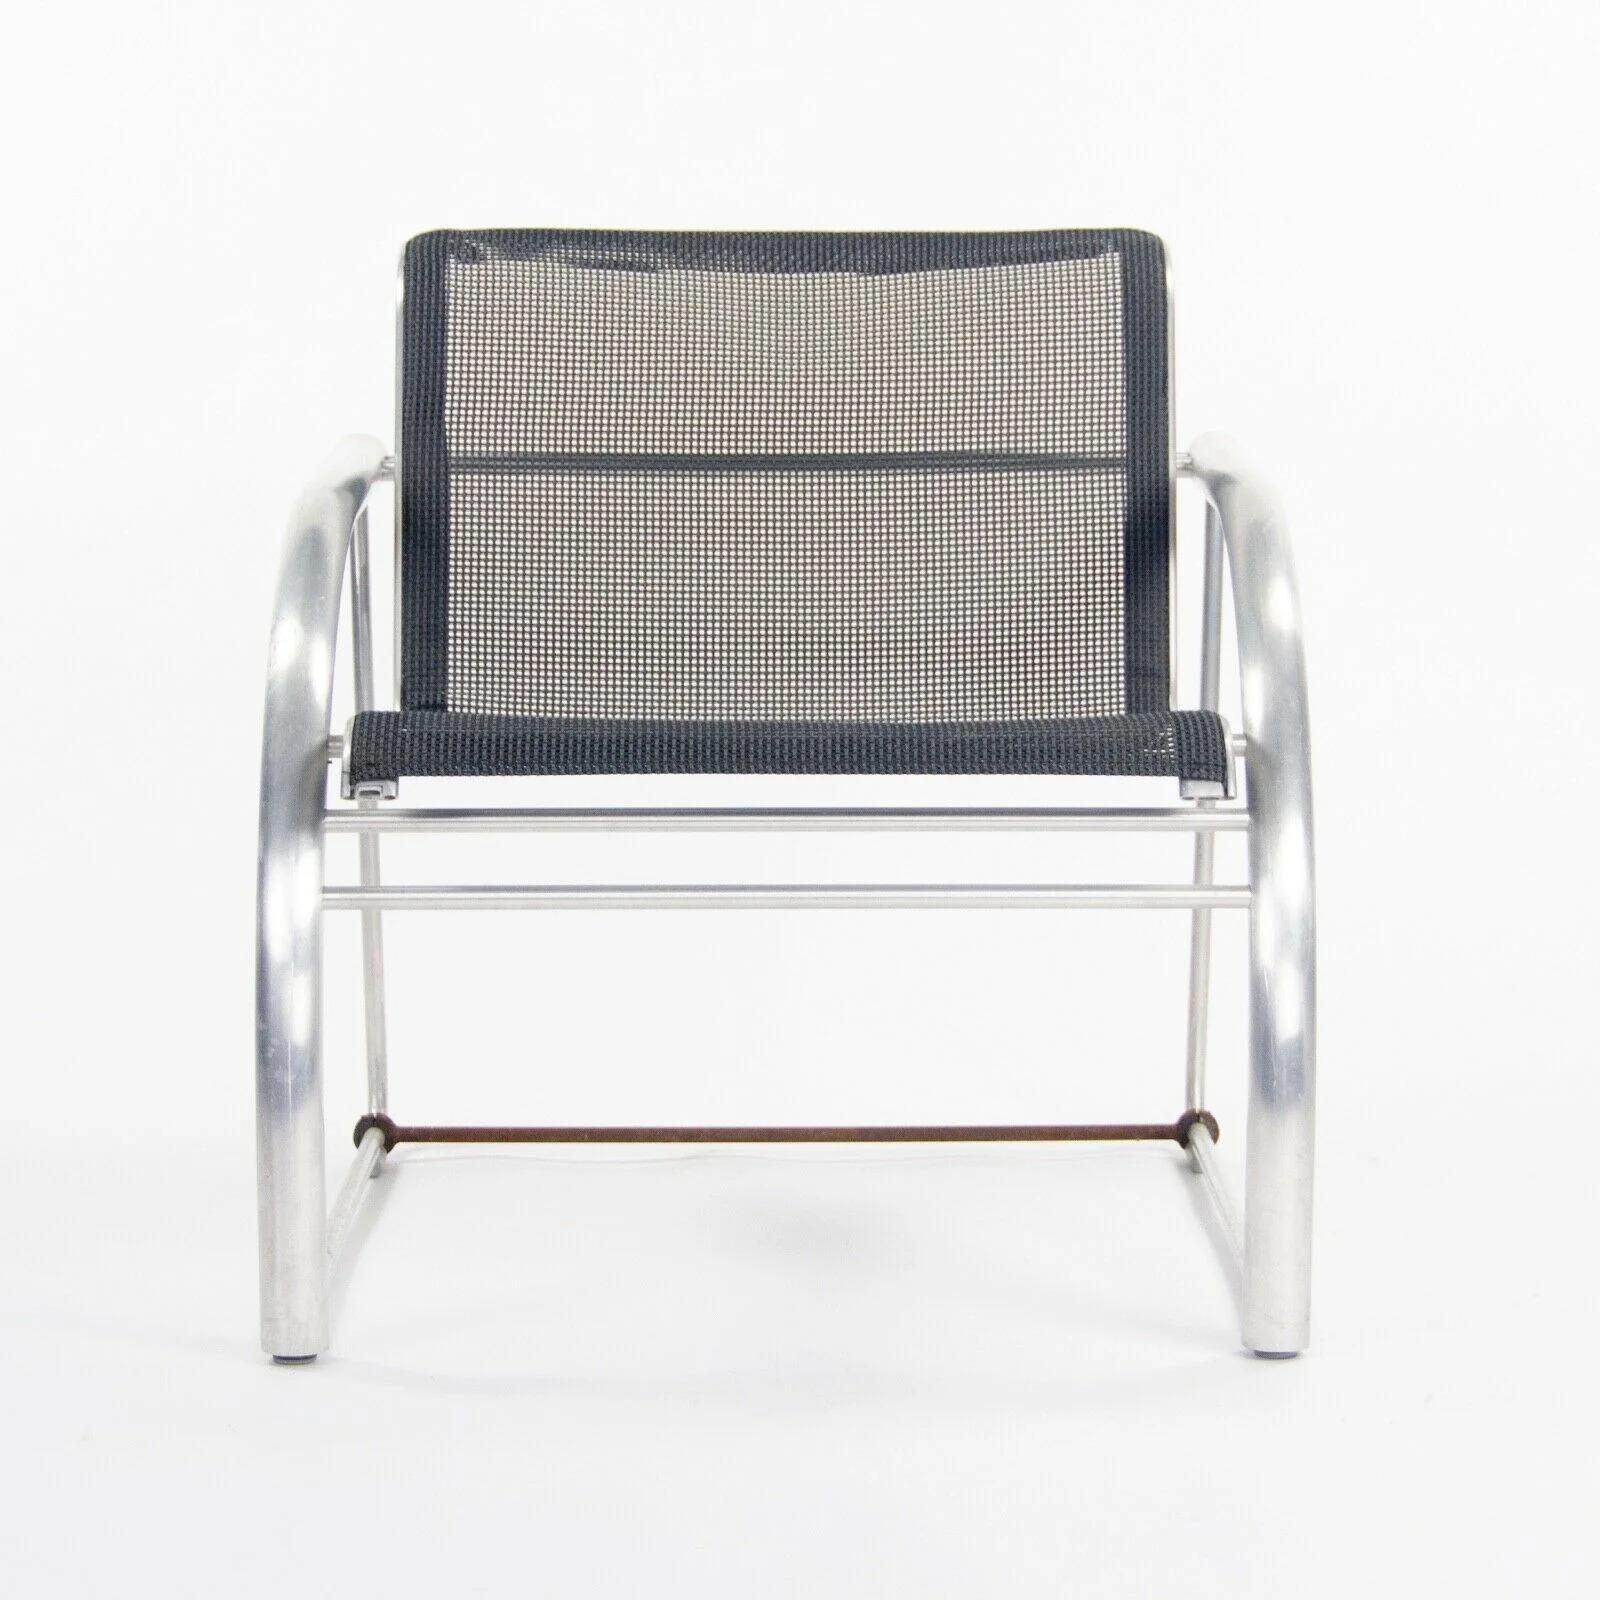 Listed for sale is a Richard Schultz 2011 Mateo Collection aluminum lounge chair prototype with mesh upholstery. This is a marvelous and rare example of a Mateo collection lounge chair. The raw extruded aluminum frame is in terrific shape and